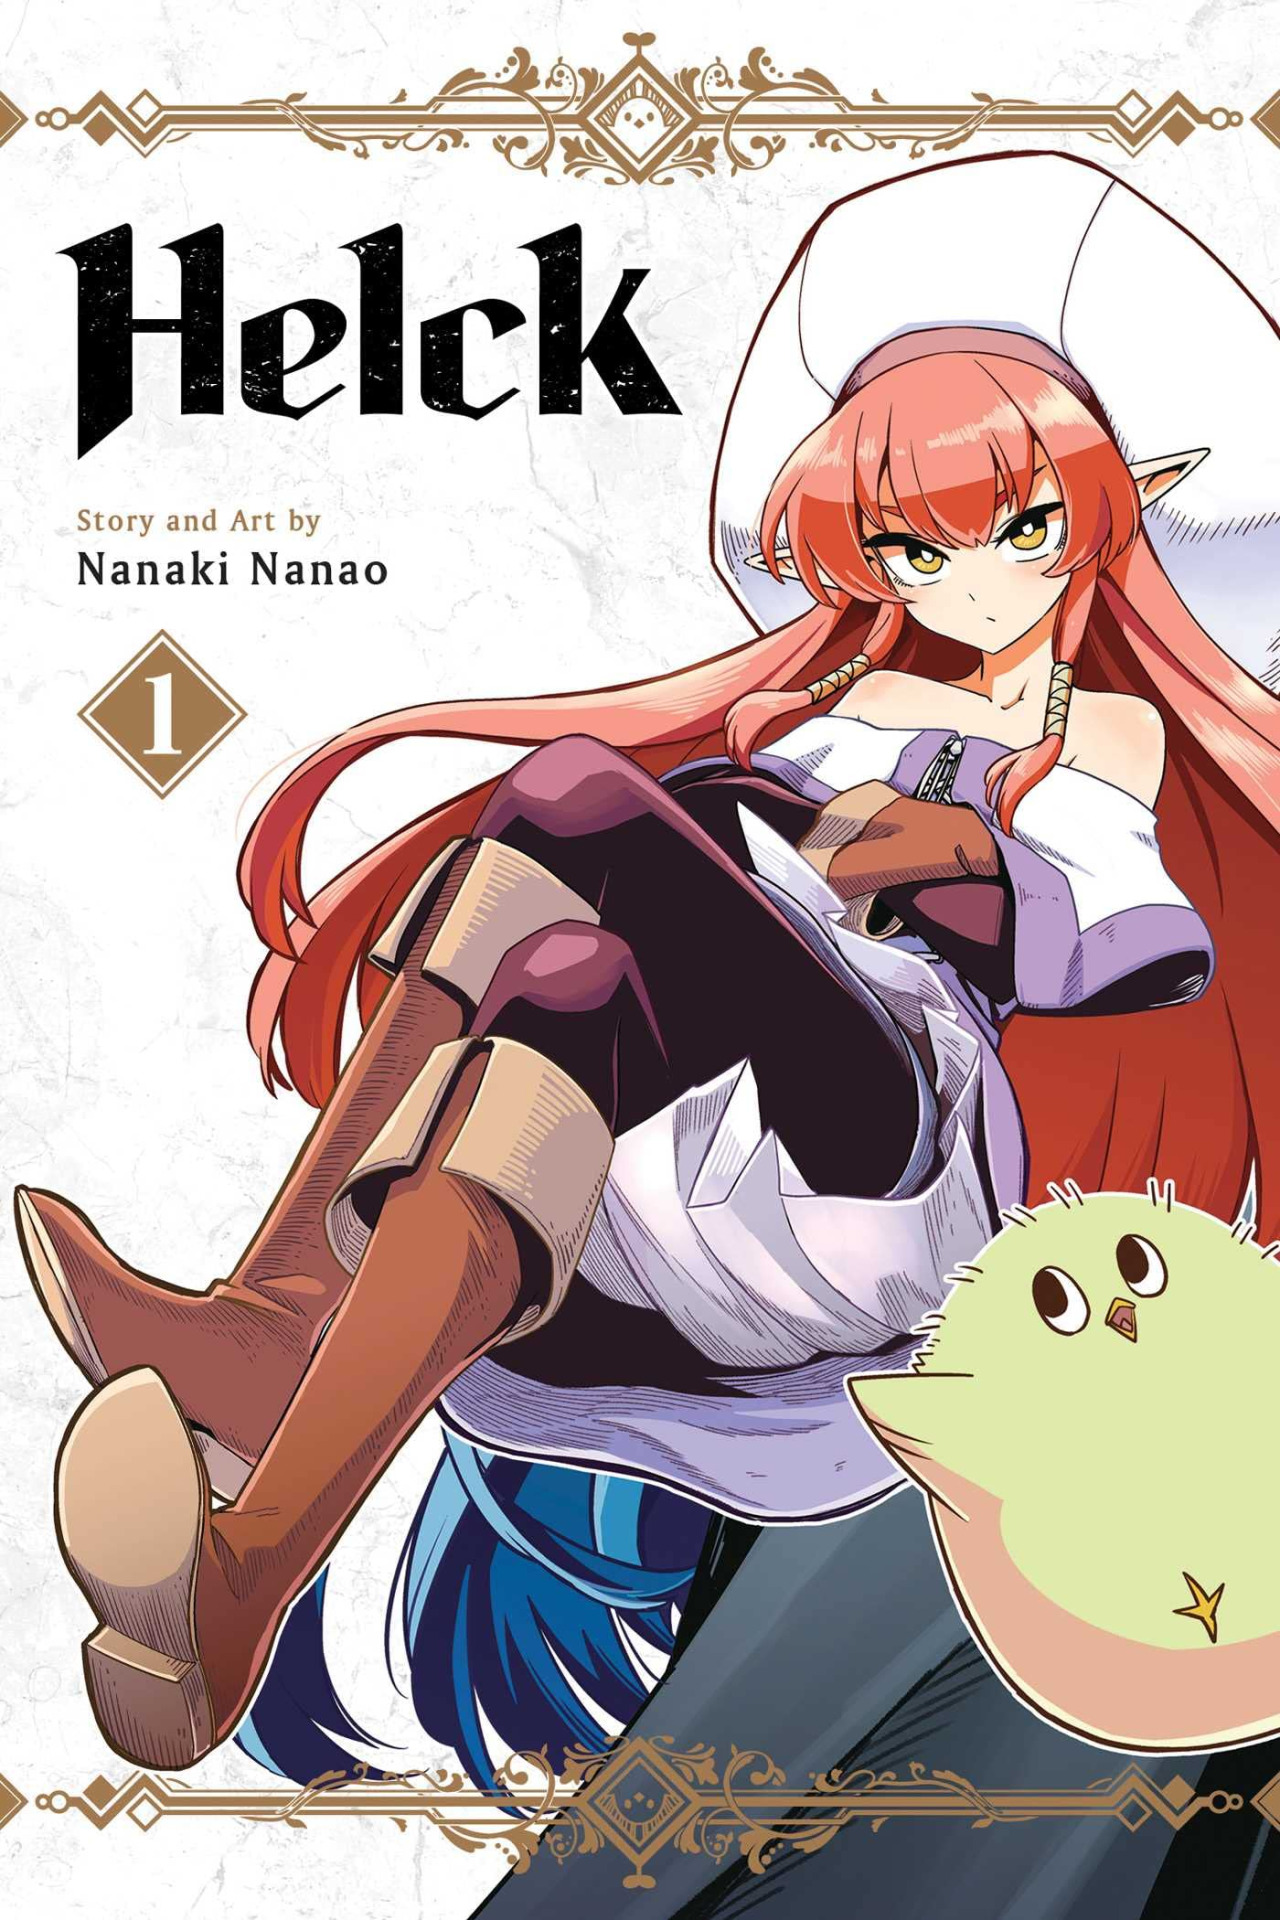 Helck - Episode 1 discussion : r/anime